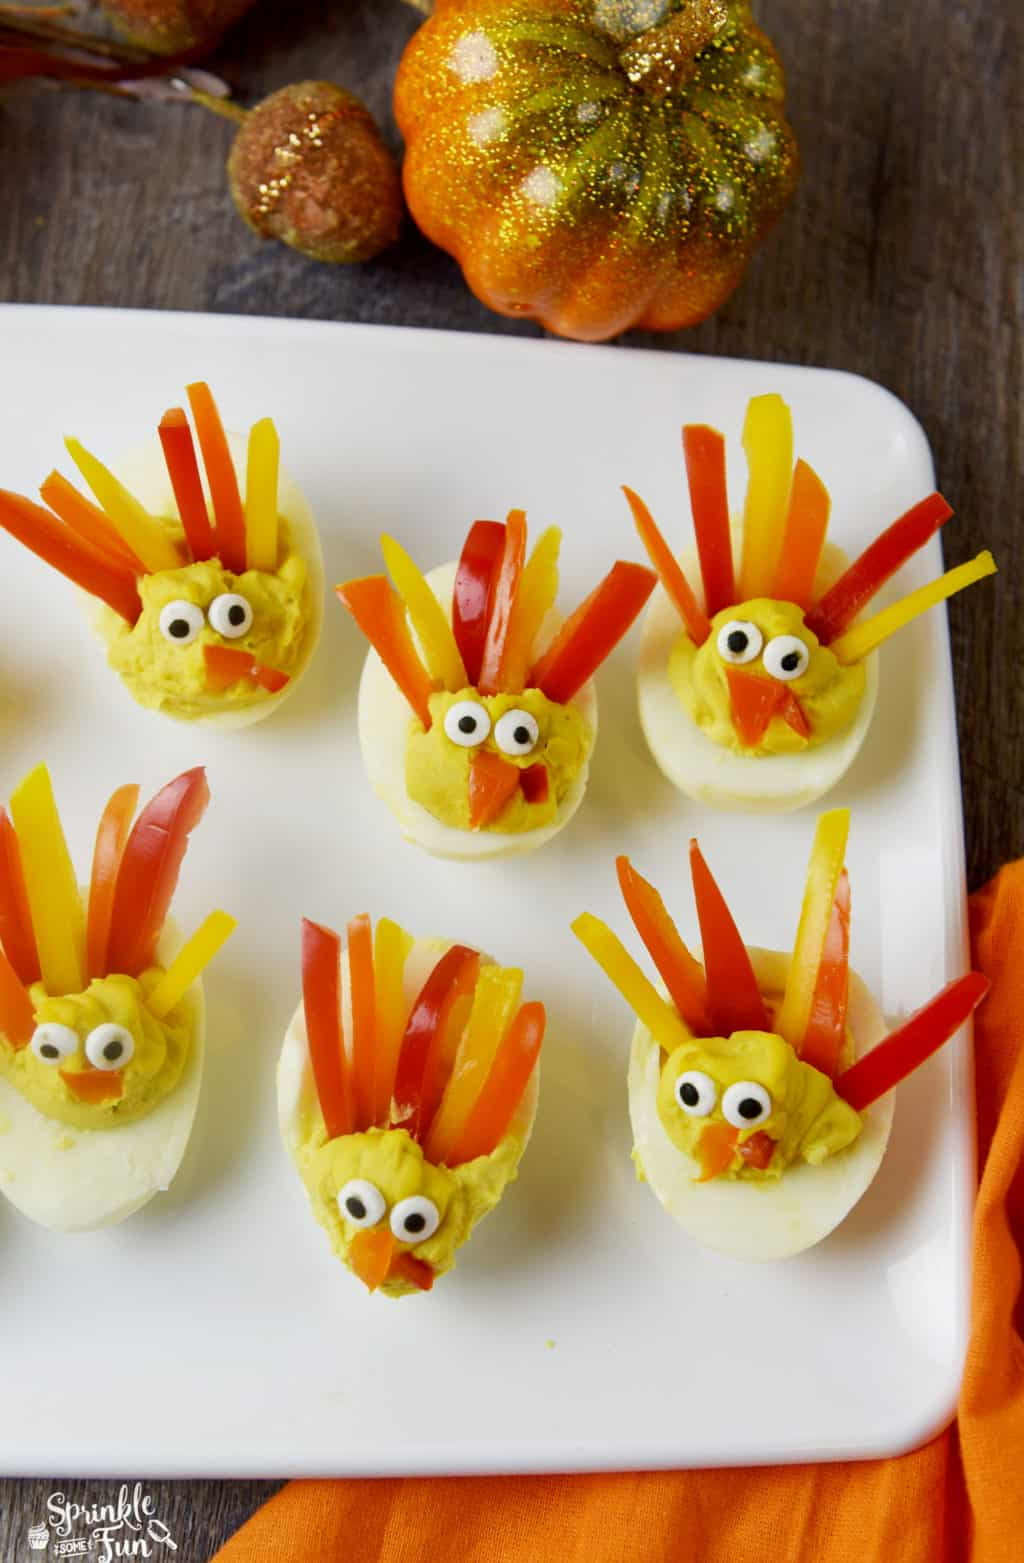 Deviled Eggs For Thanksgiving
 These Deviled Egg Turkeys are a cute way to dress up your